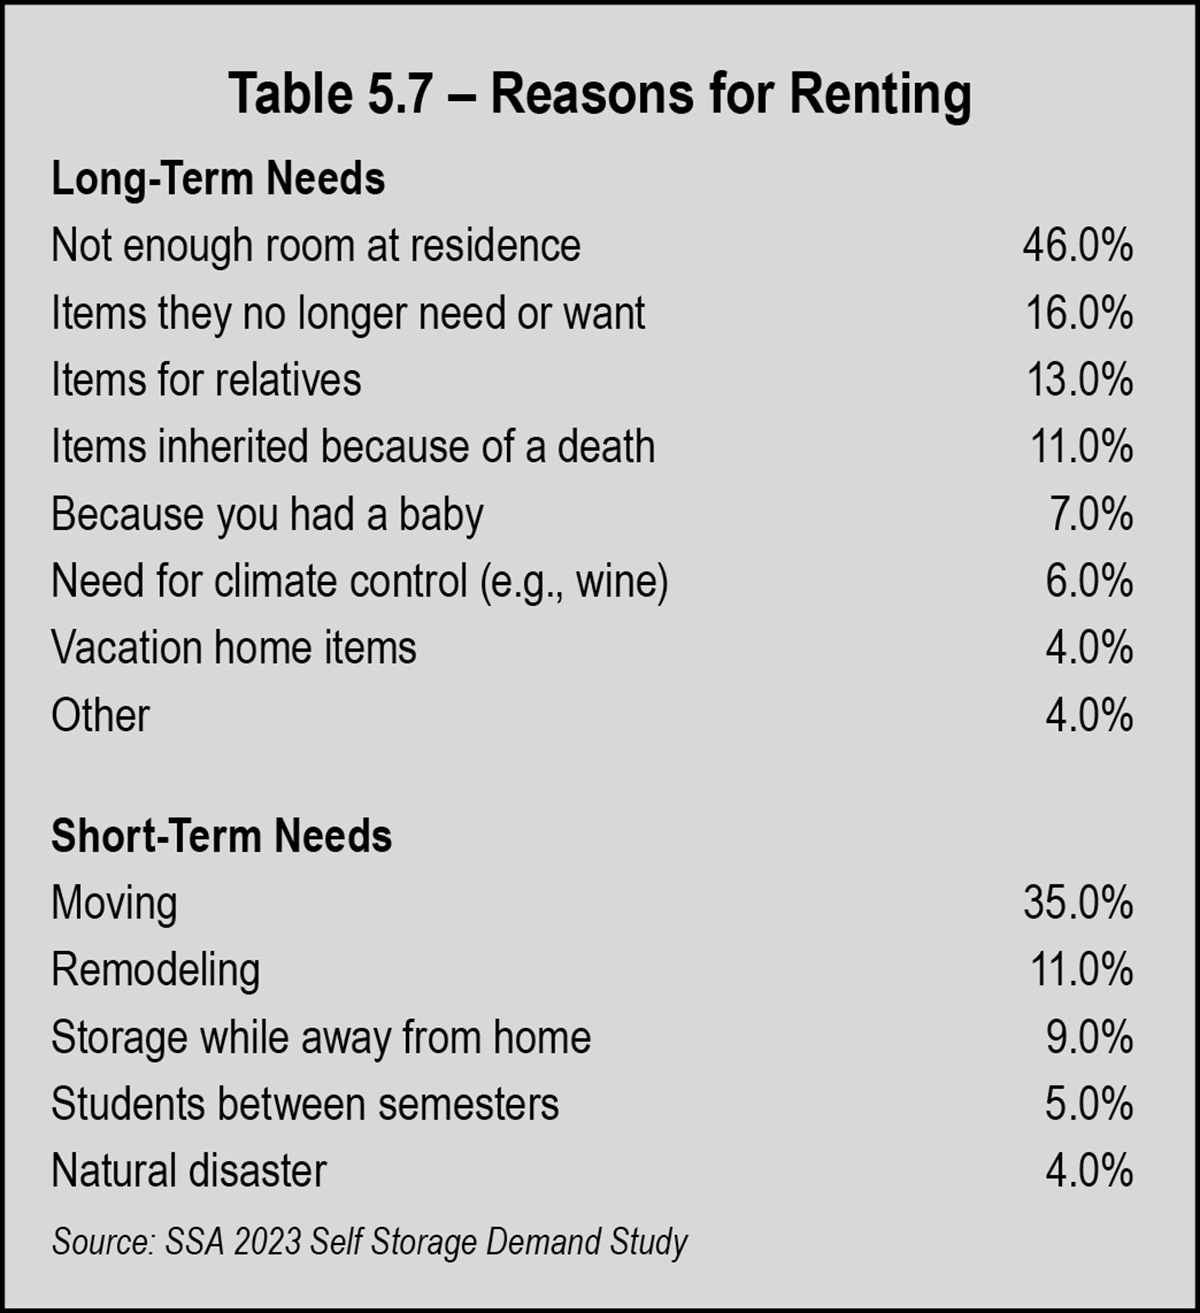 Table 5.7 – Reasons for Renting